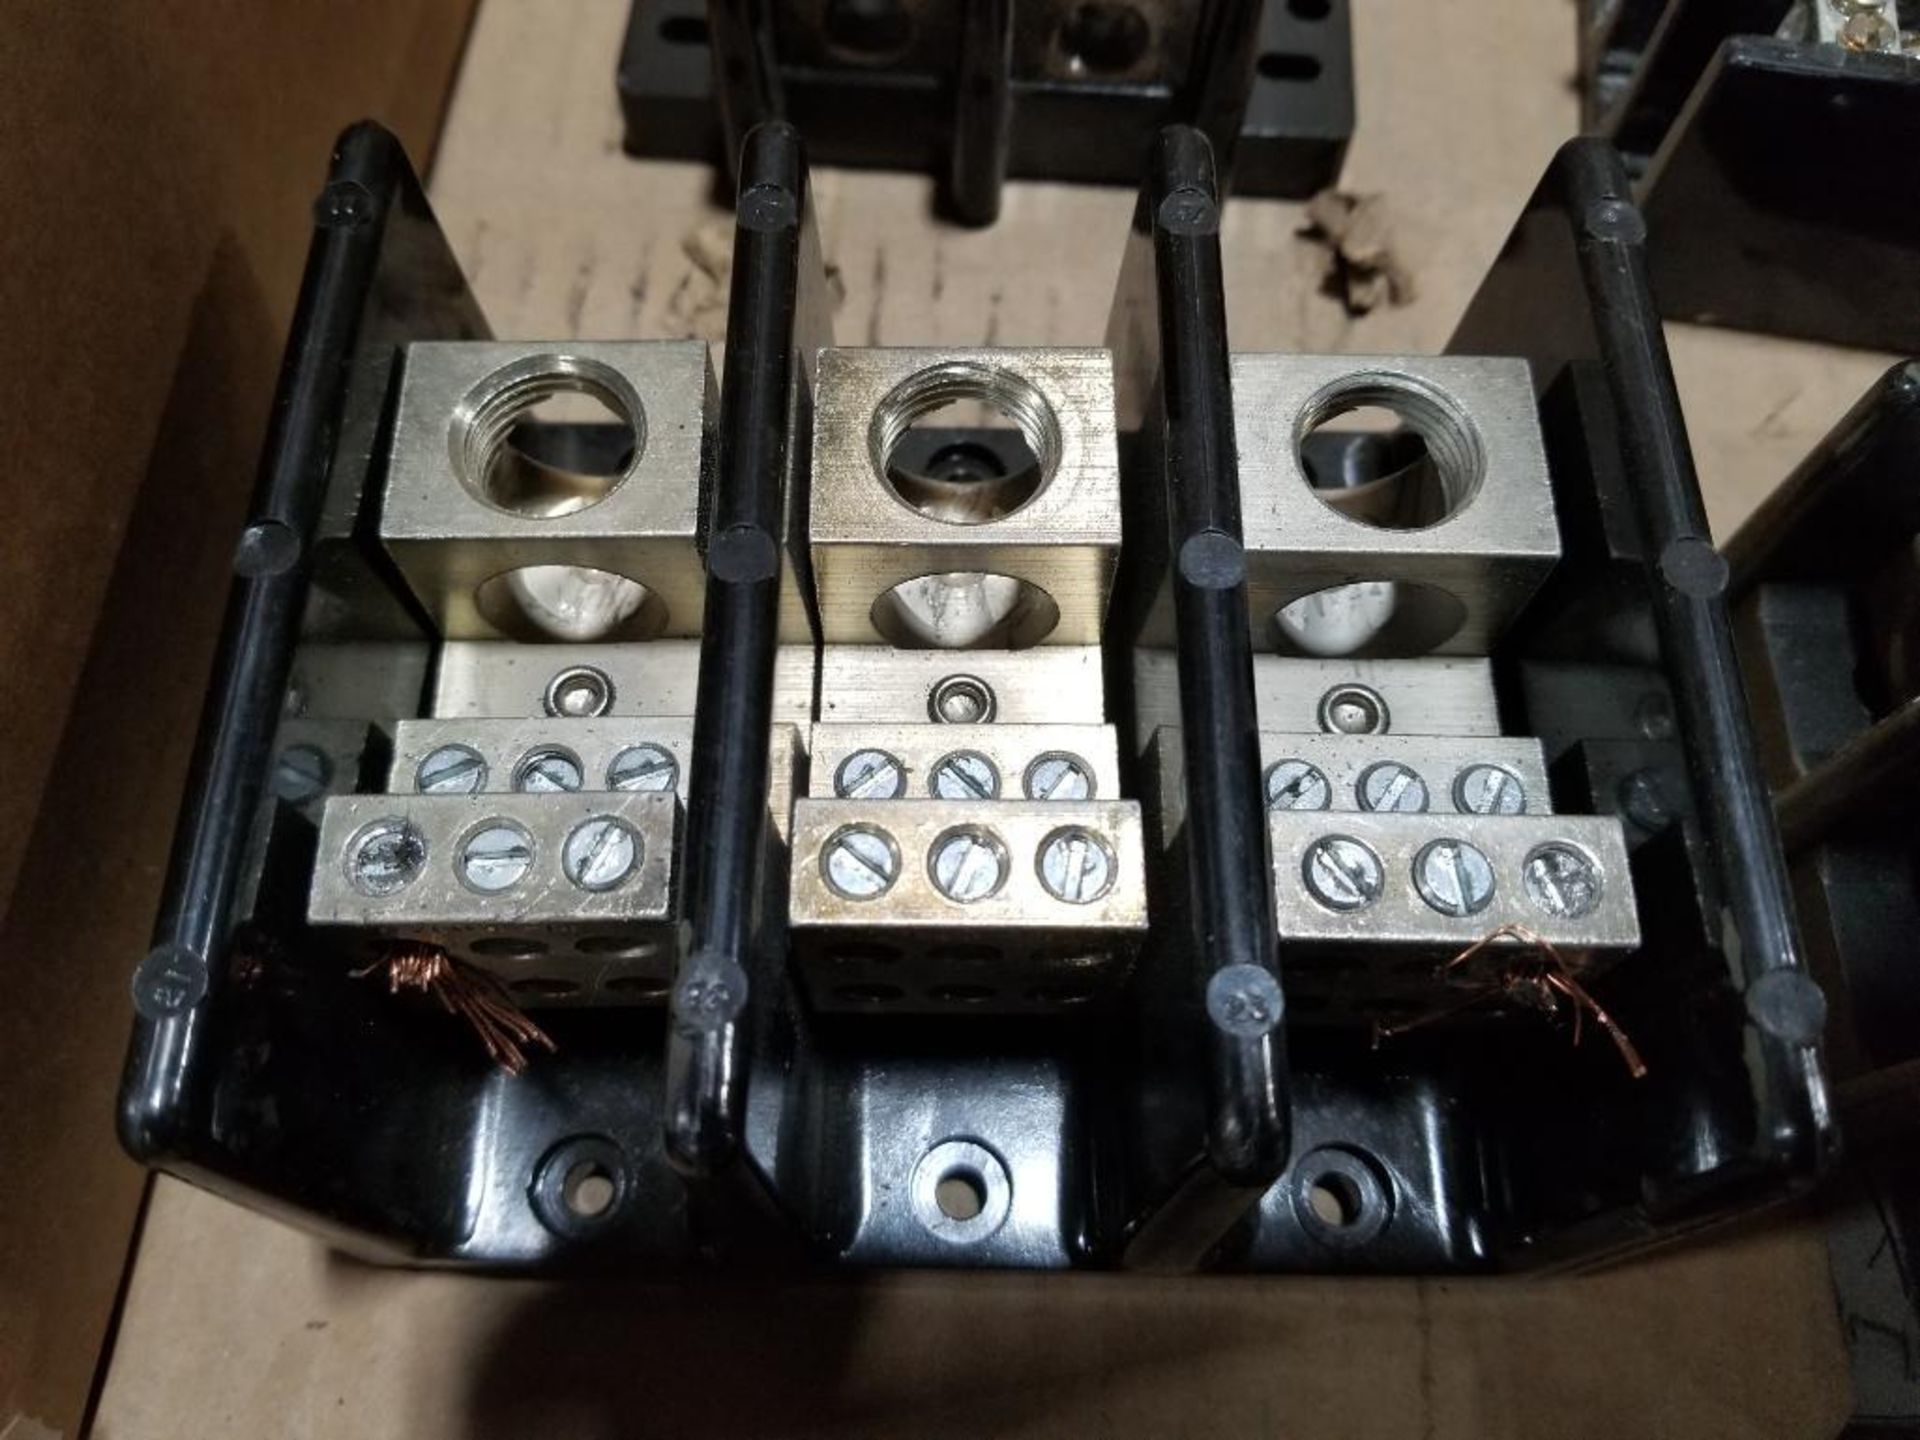 Assorted fuse holders, distribution lugs, and relays. - Image 13 of 15